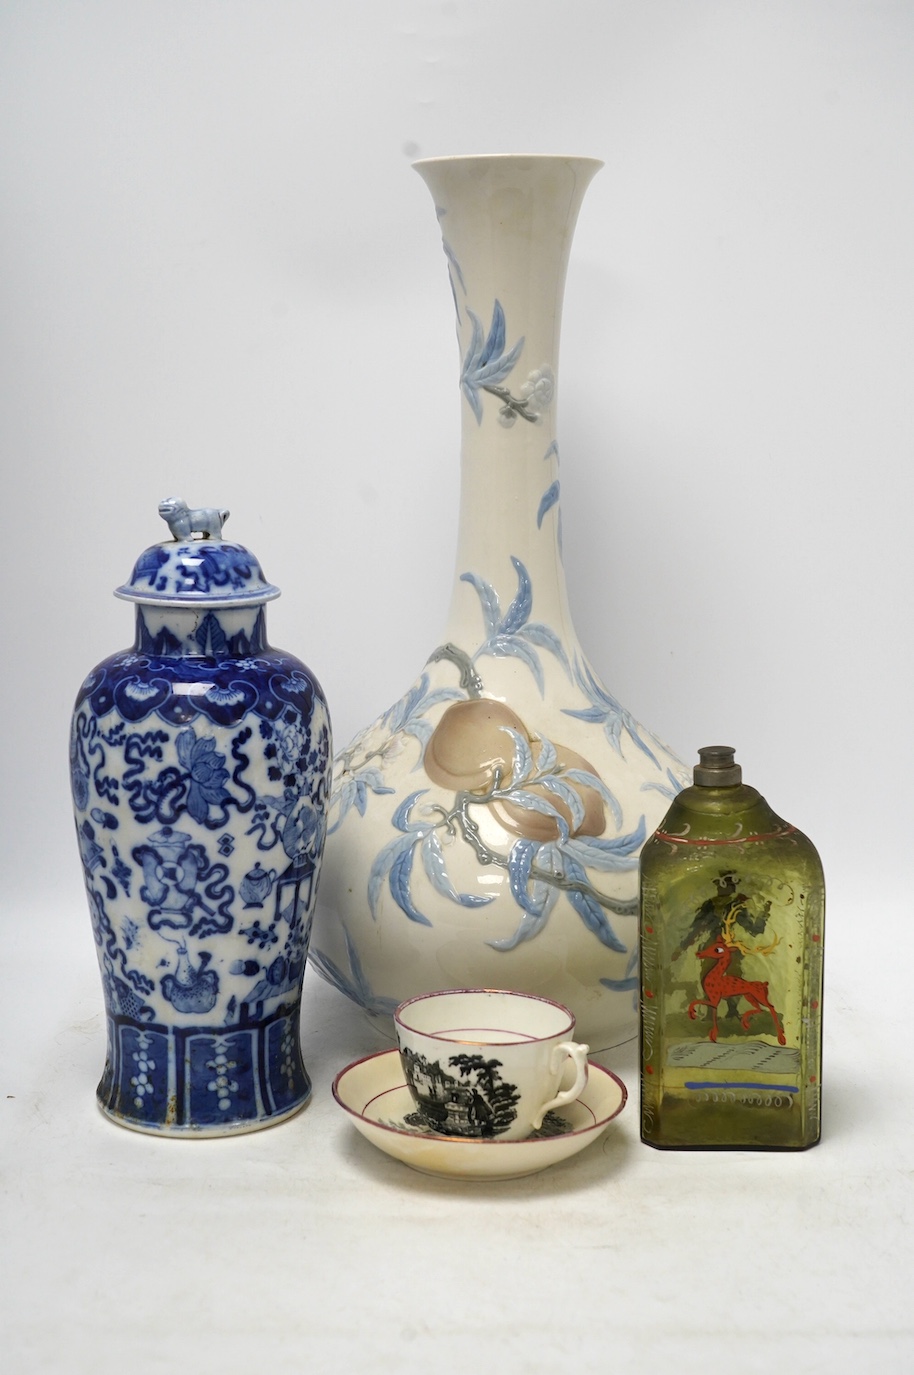 Four ceramic items including a large Lladro vase, 47.5cm high, a Chinese lidded vase, an early 19th century painted bottle and a lustre teacup and saucer. Condition - fair to good